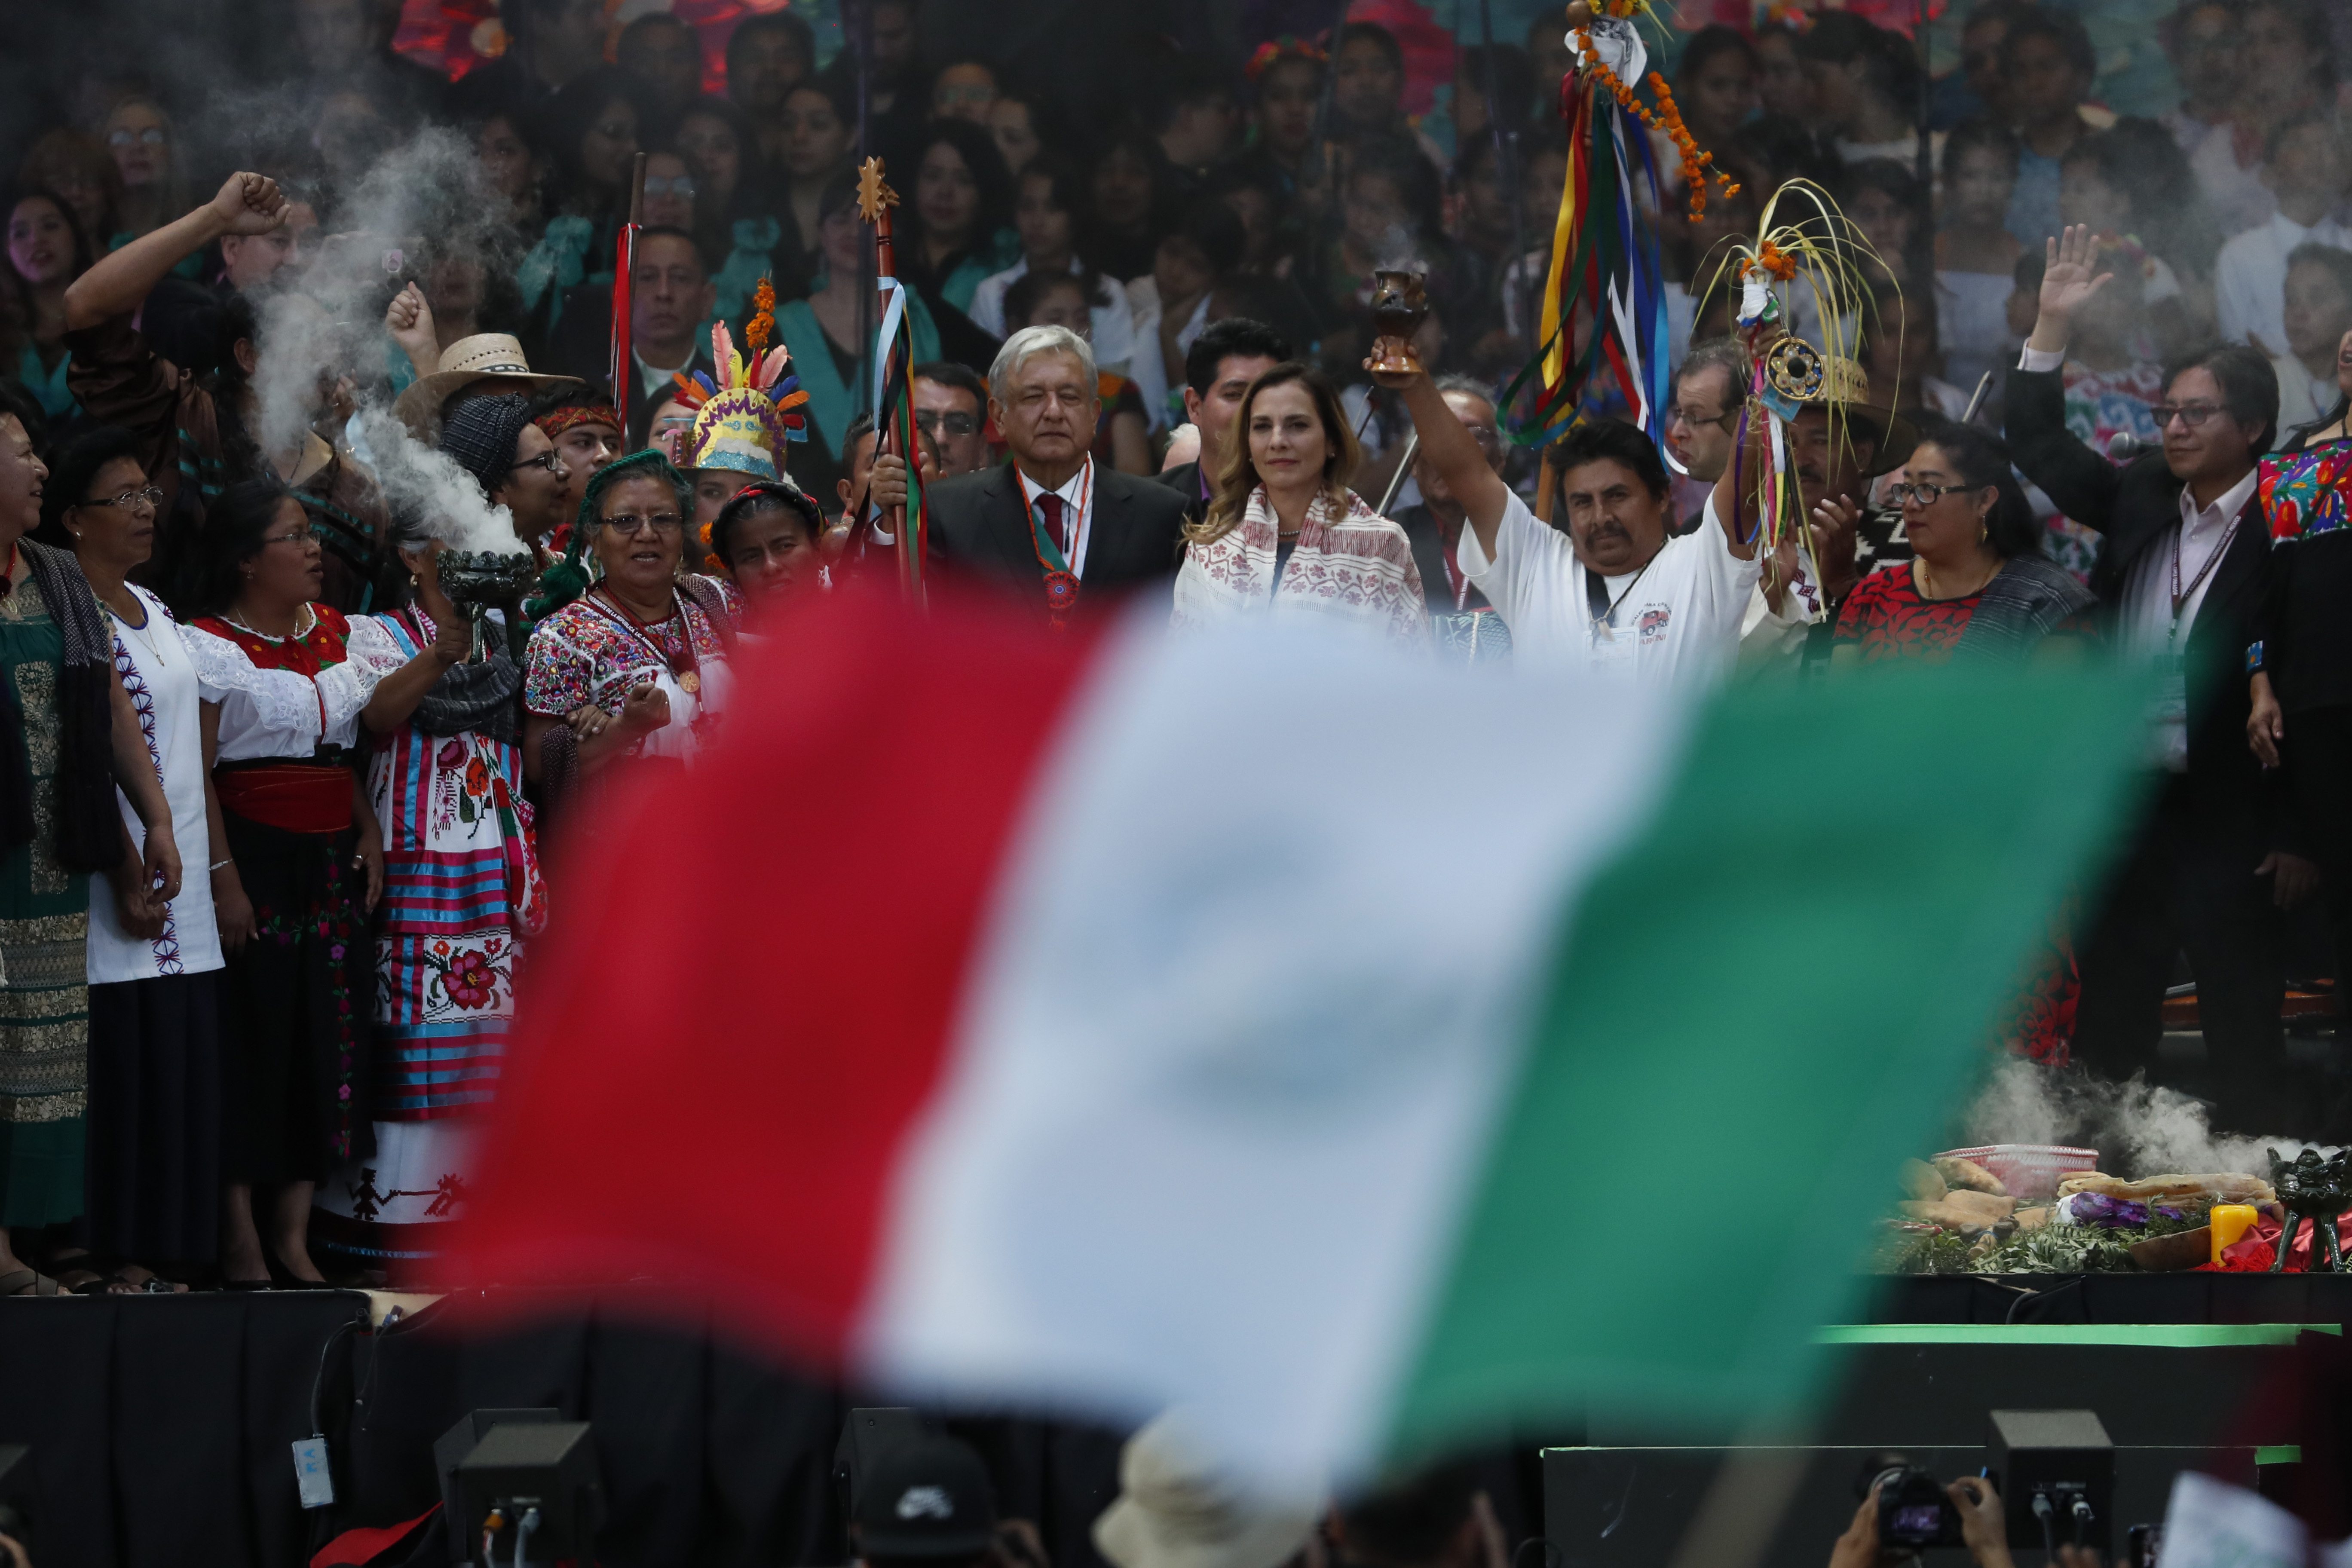 Mexico's new President Andres Manuel Lopez Obrador holds a chieftain's staff during a traditional indigenous ceremony at the Zocalo, in Mexico City, Saturday, Dec. 1, 2018. Mexicans are getting more than just a new president Saturday. The inauguration of Lopez Obrador will mark a turning point in one of the world's most radical experiments in opening markets and privatization. (AP Photo/Moises Castillo)